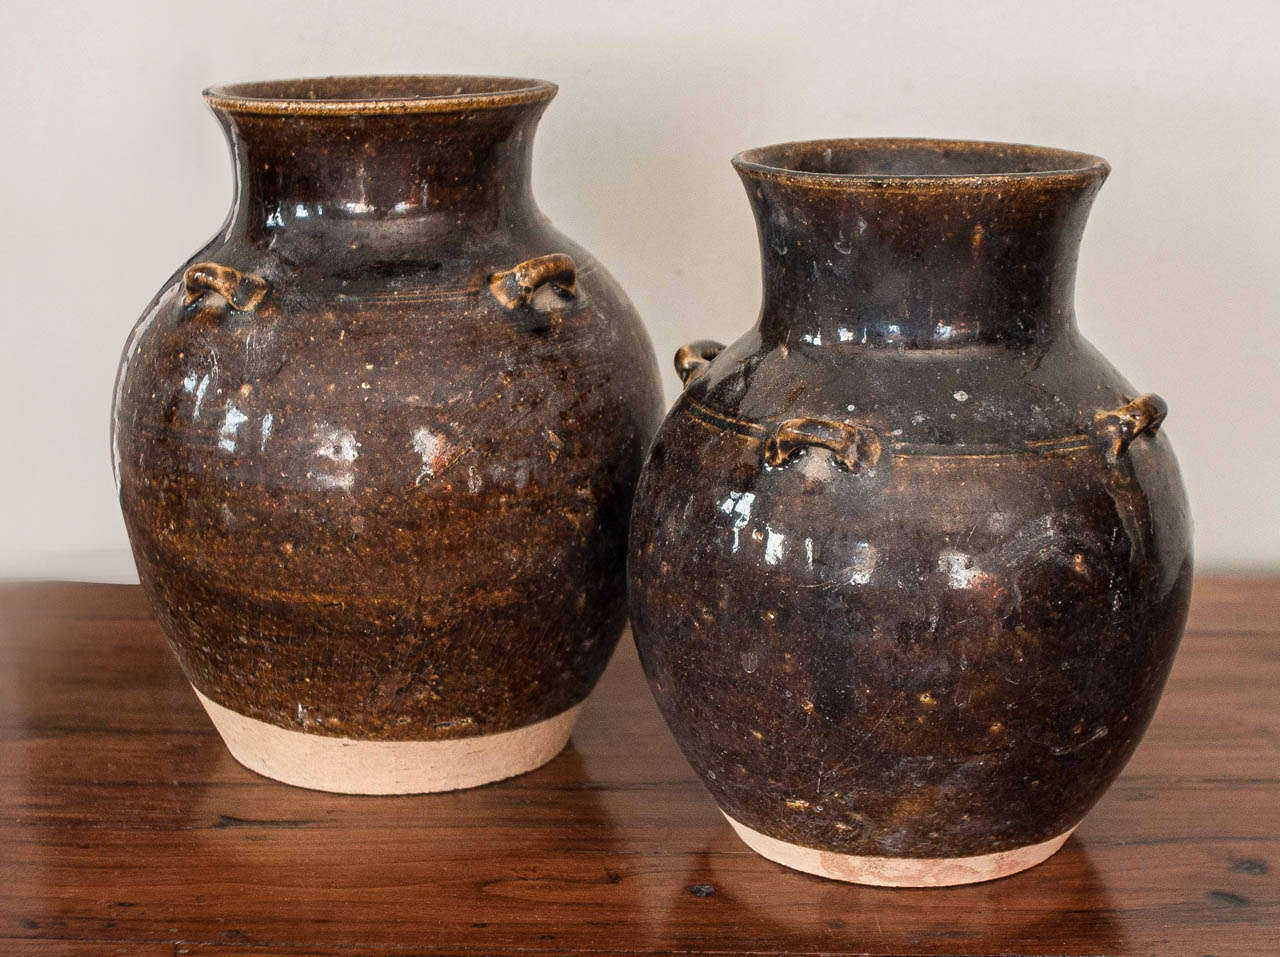 Two Chinese brown glaze ceramic pots with lug handles.